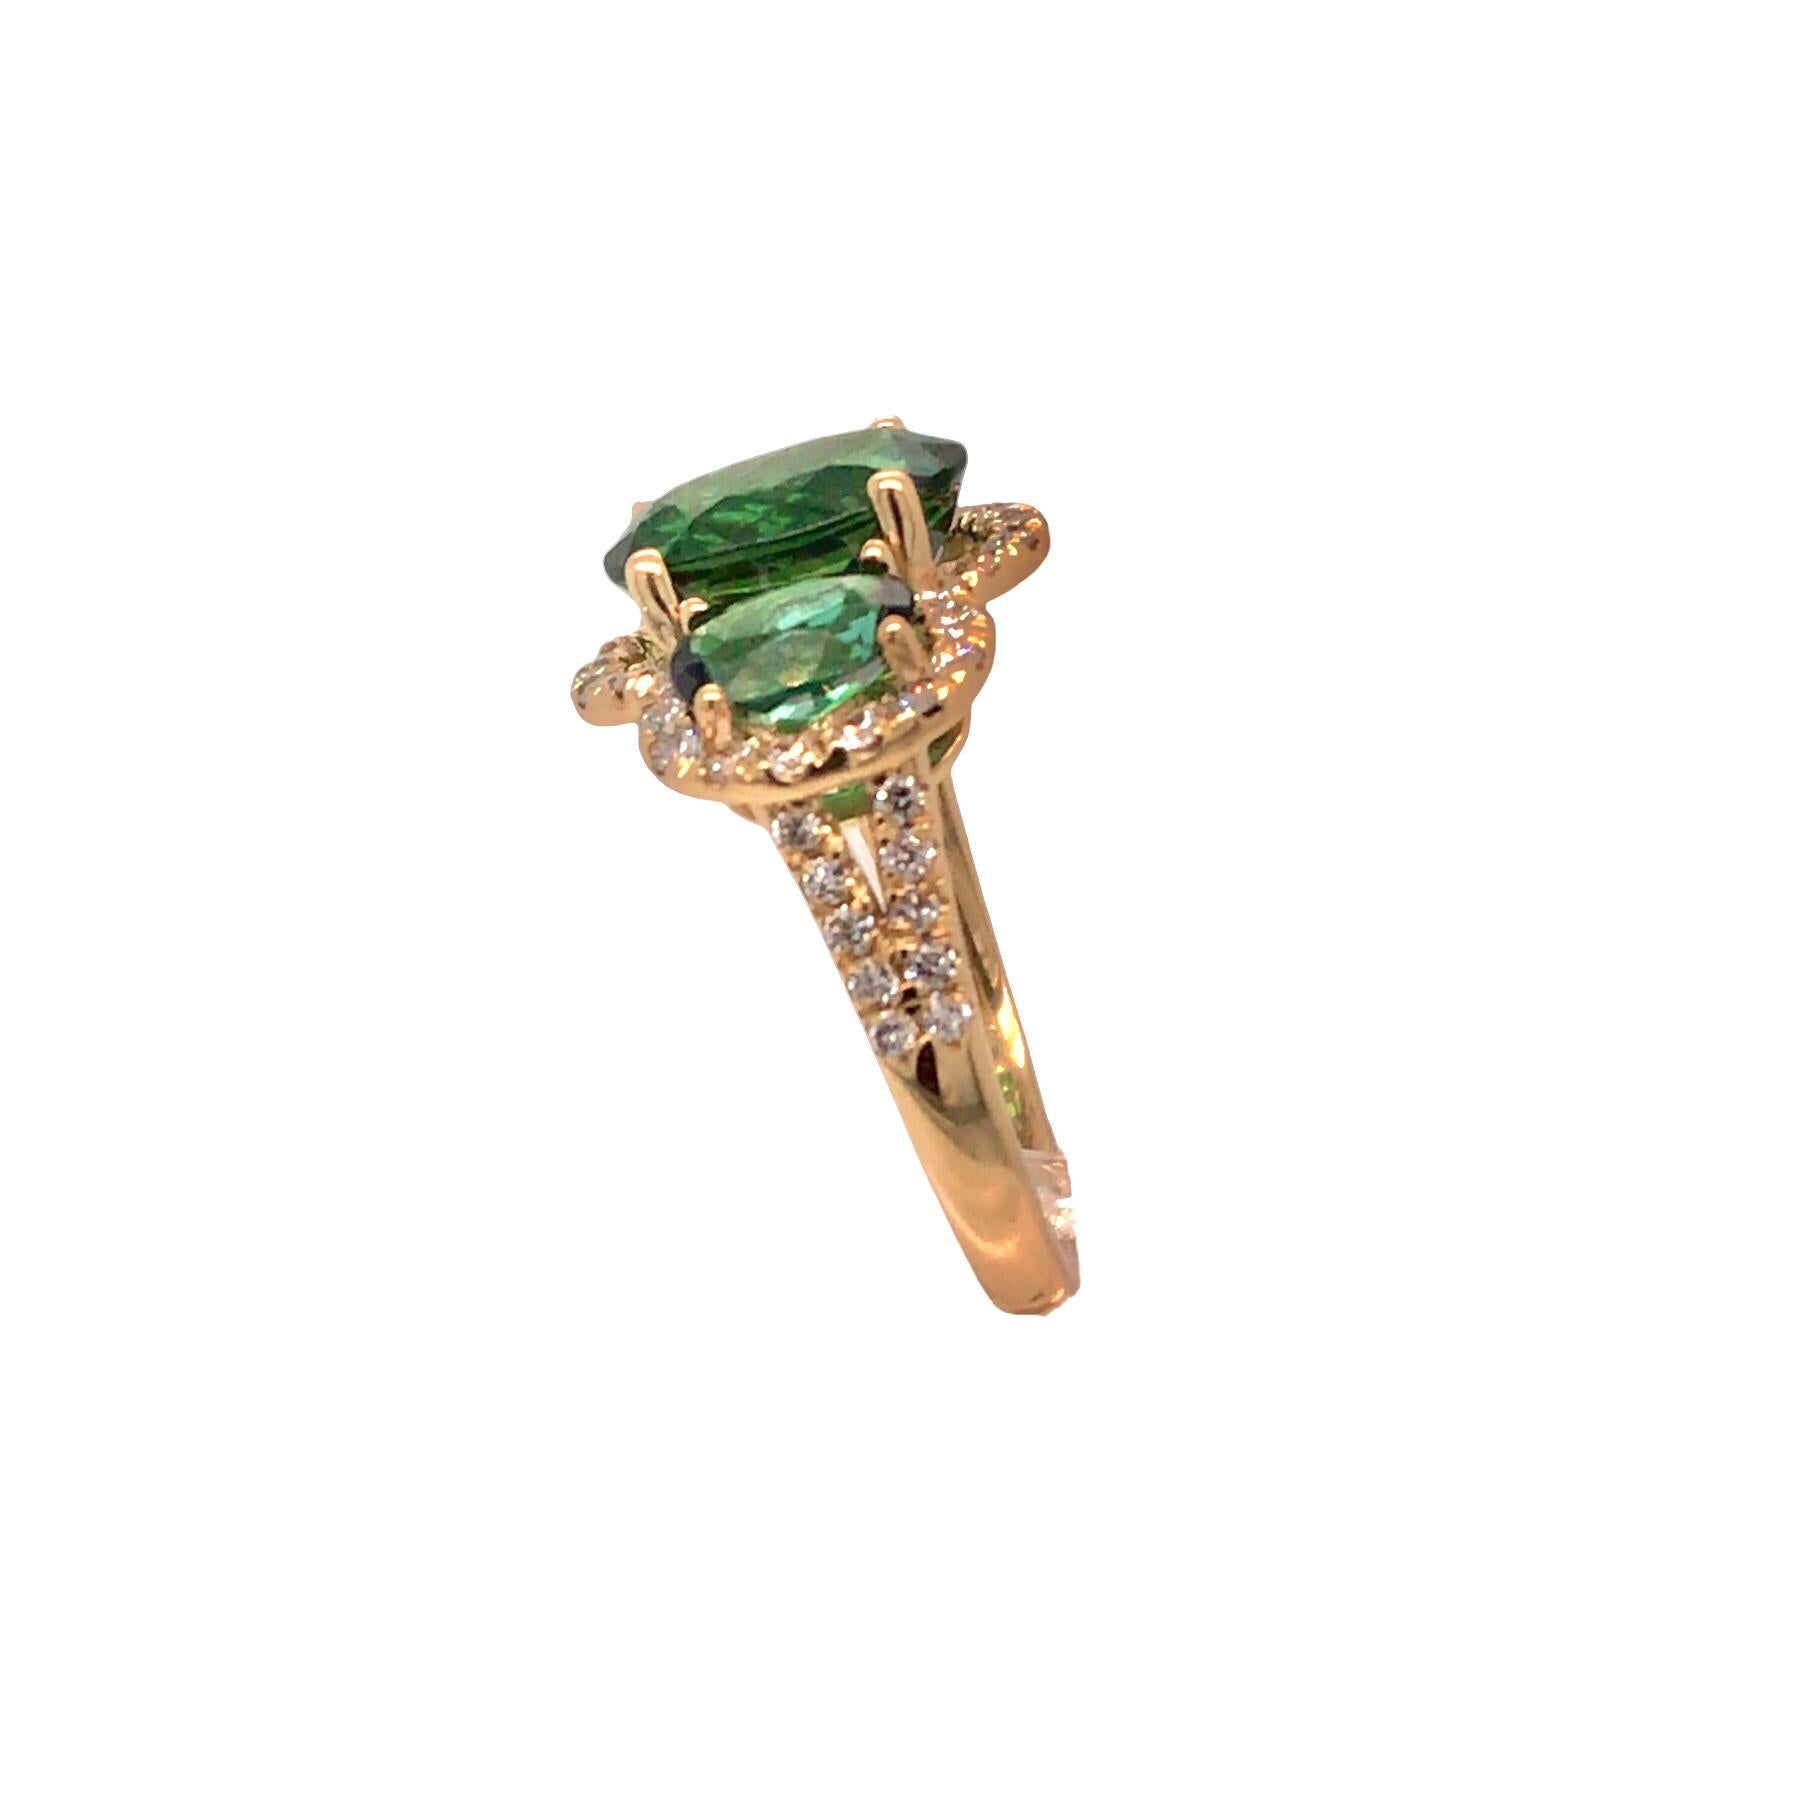 Elevate your style with the epitome of elegance and luxury. Our exquisite ring features three stunning oval-cut green tourmalines, totaling a remarkable 4.62 carats. These vibrant gemstones are framed by a radiant halo of brilliant, natural white